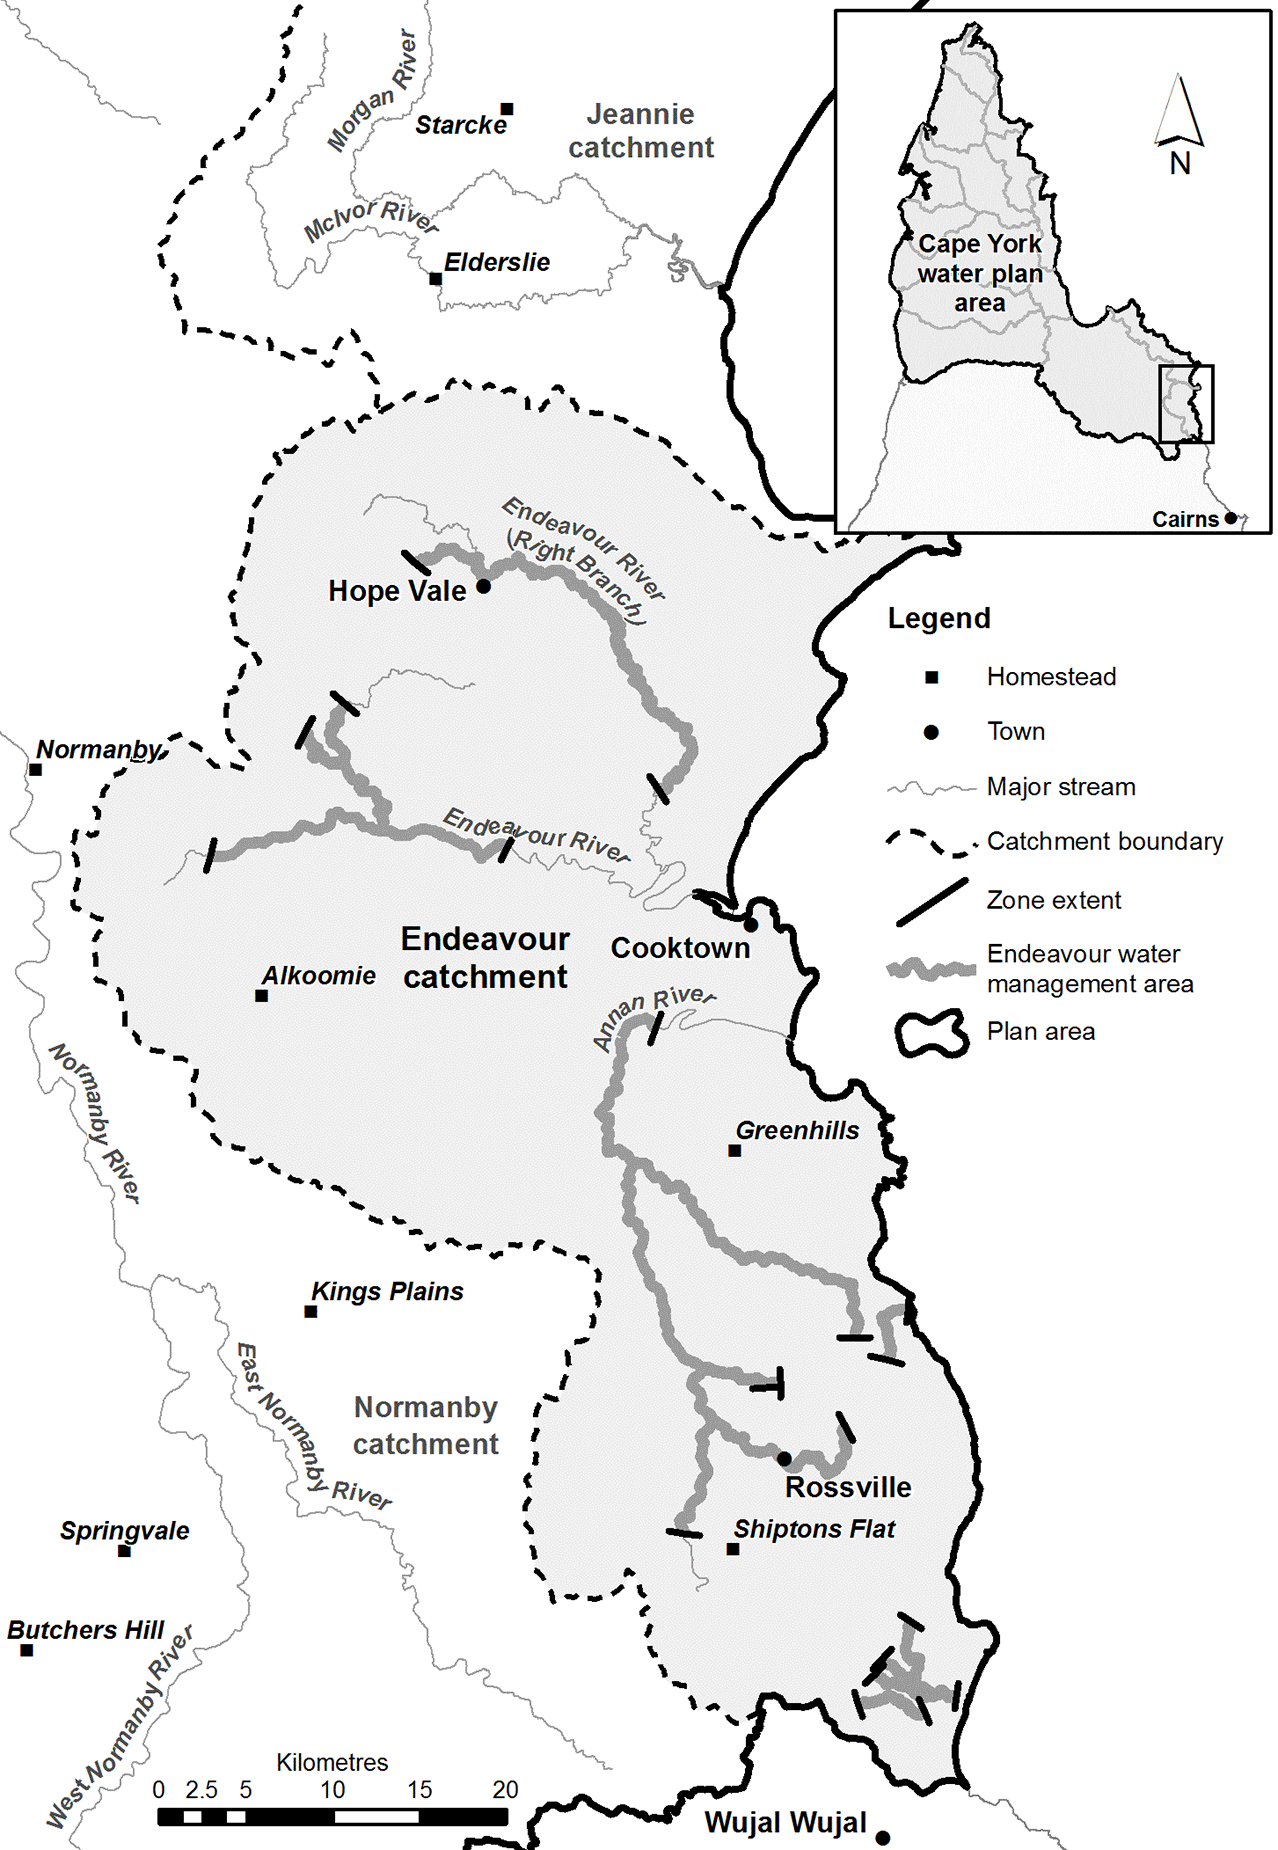 Map showing Endeavour water management area